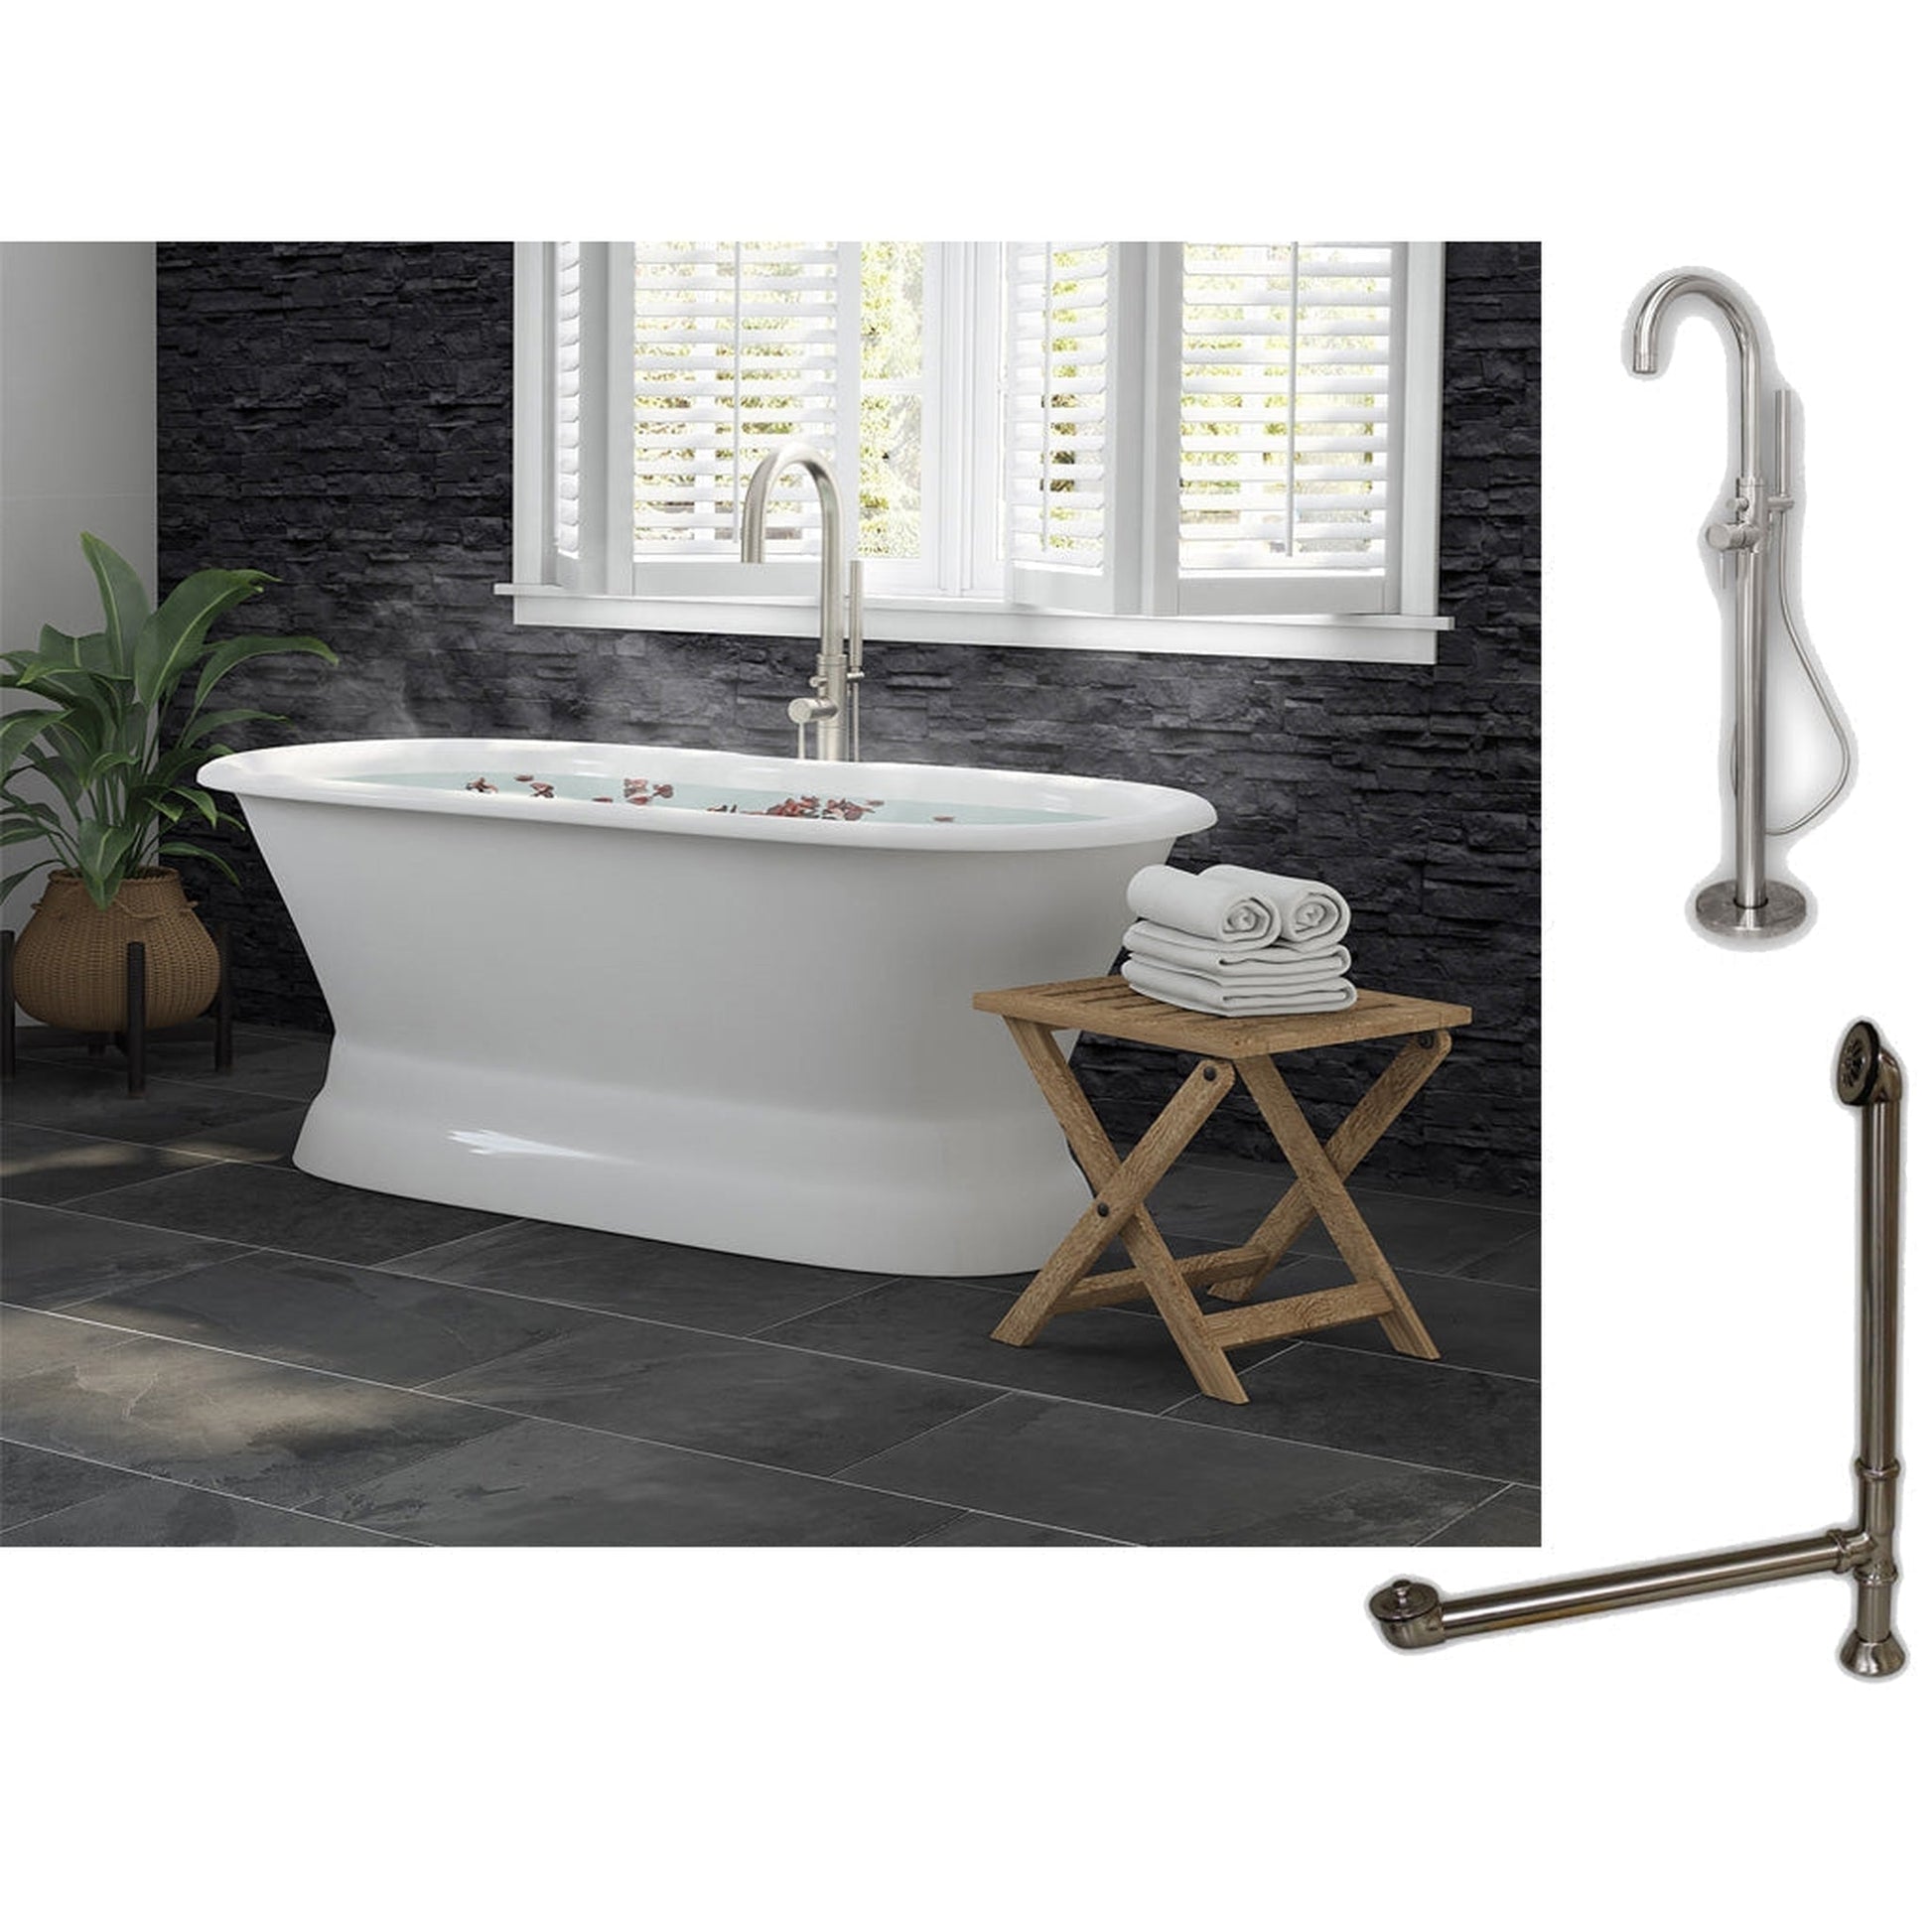 Cambridge Plumbing 60" White Cast Iron Double Ended Pedestal Bathtub With No Deck Holes And Complete Plumbing Package Including Modern Floor Mounted Faucet, Drain And Overflow Assembly In Brushed Nickel